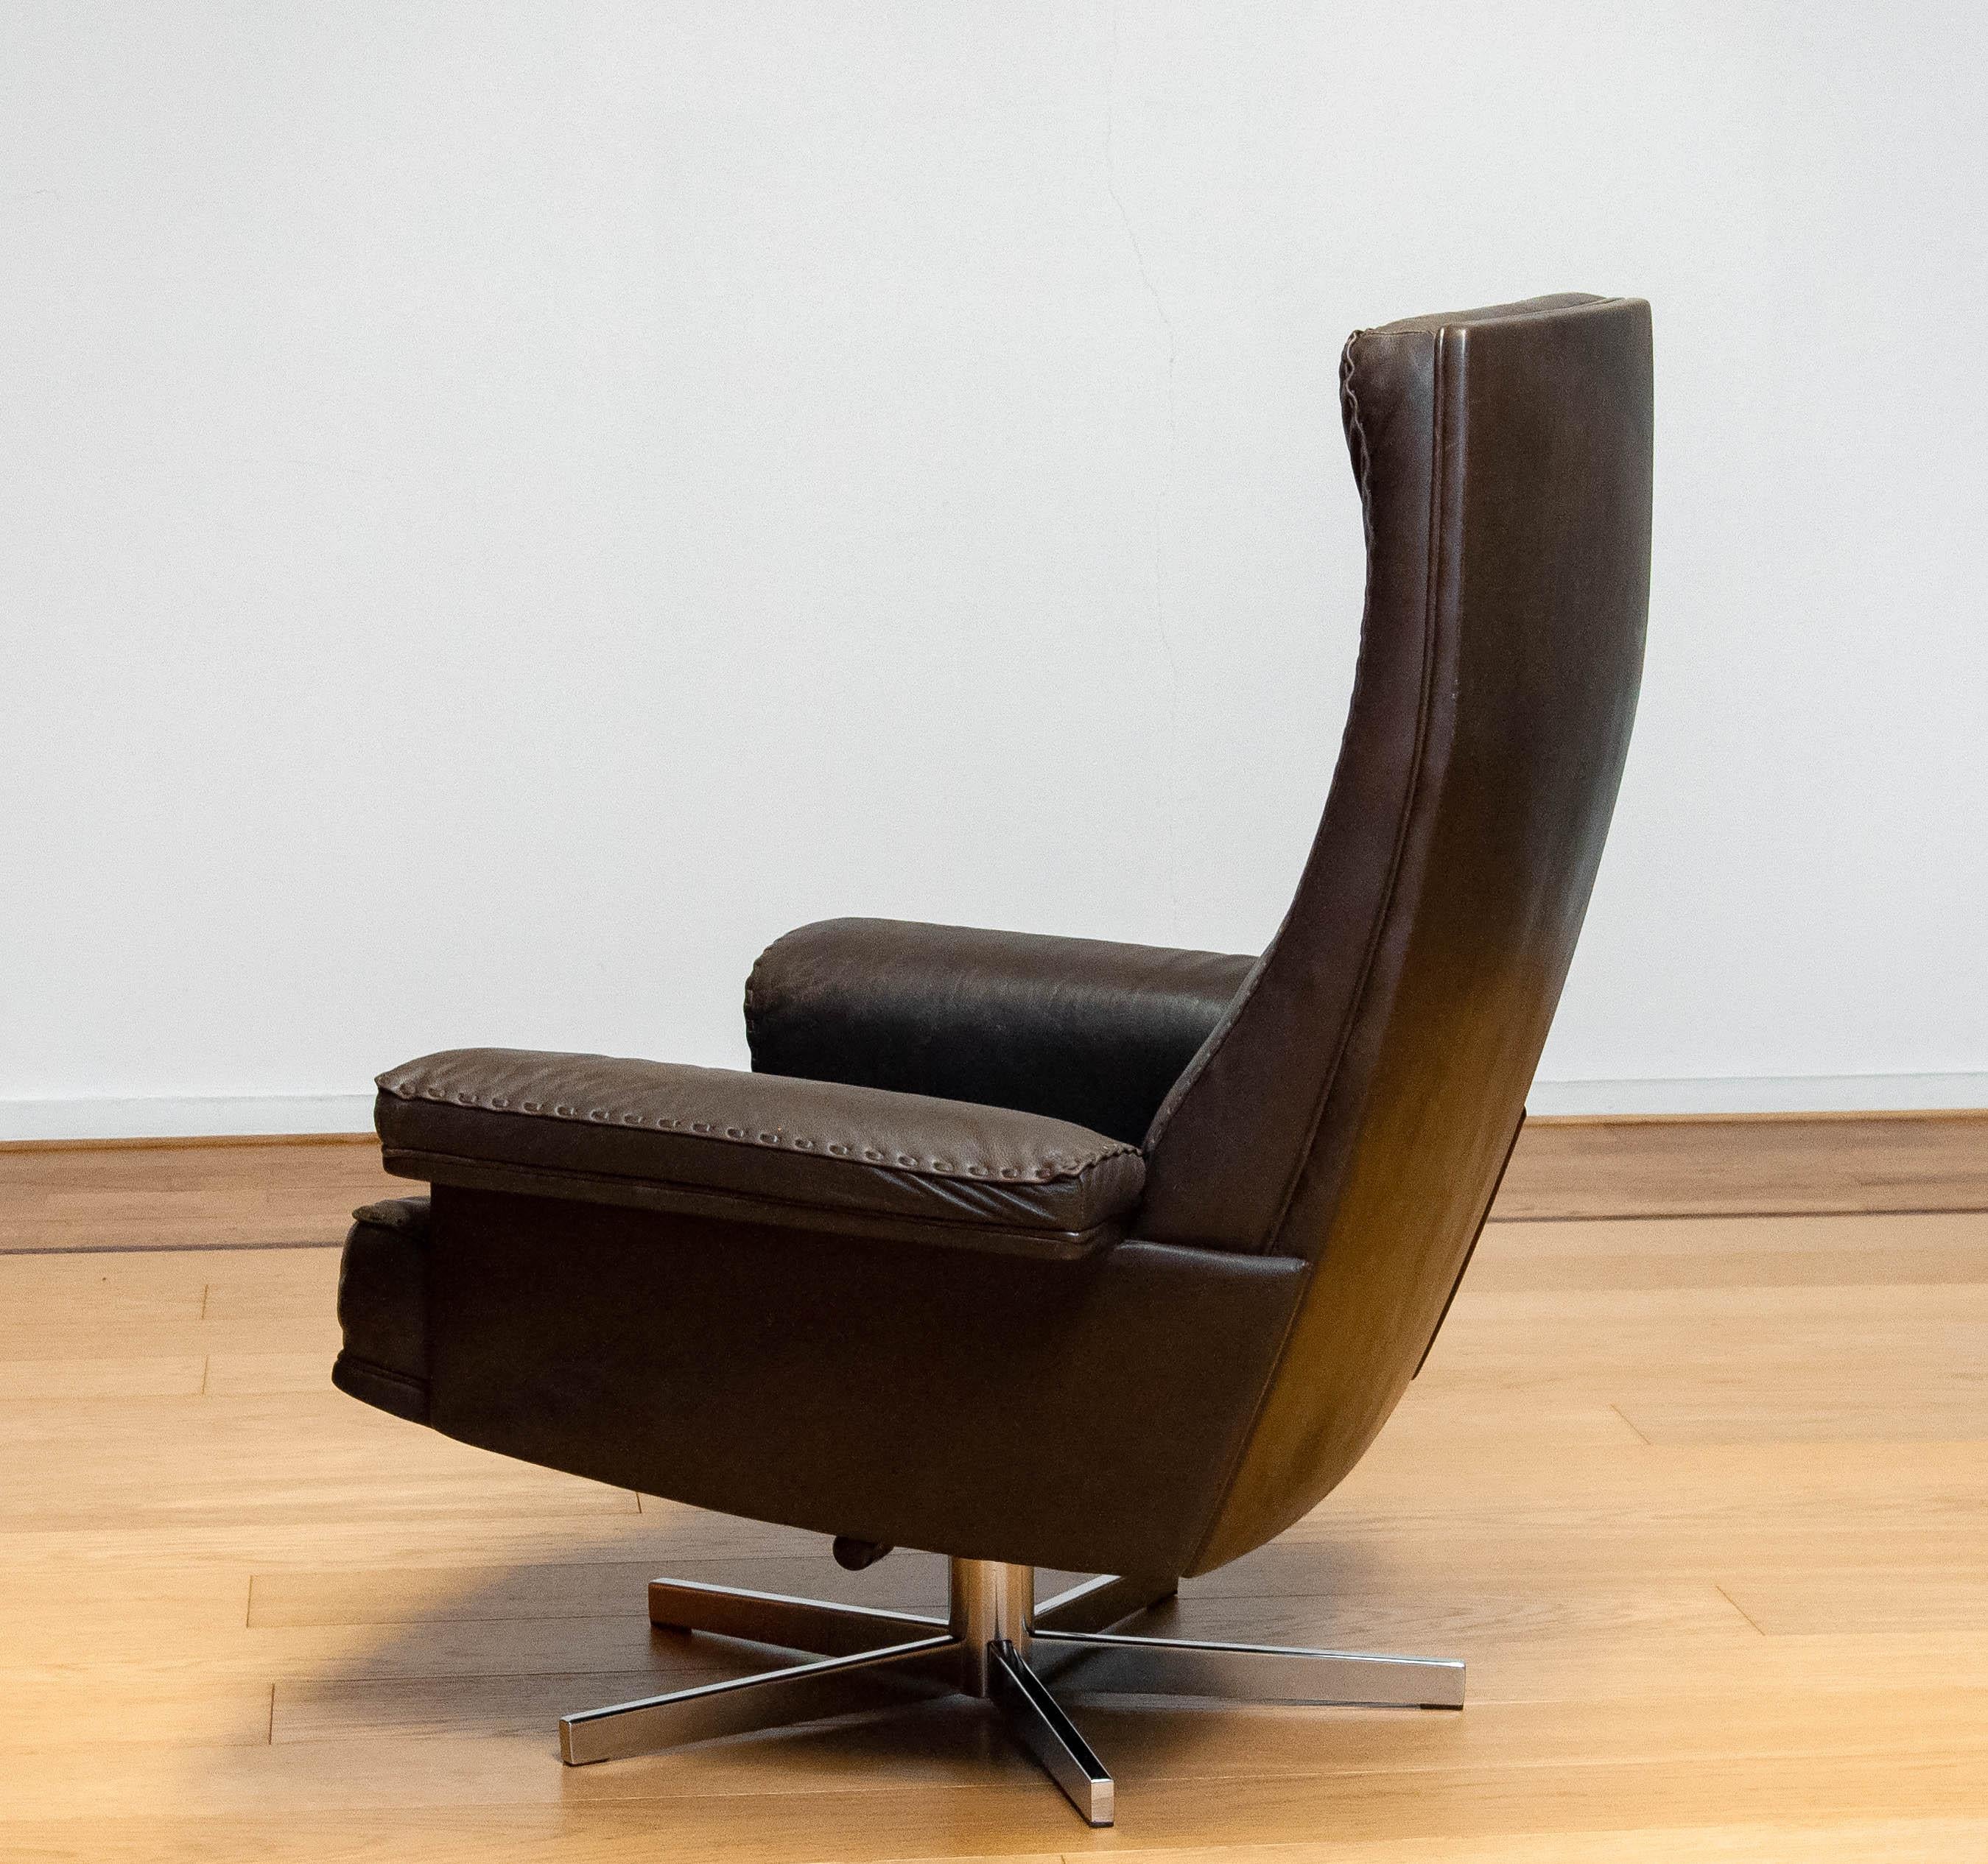 1970s Handstitched Brown Leather Swivel Chair with Chrome Base by De Sede DS-35 1